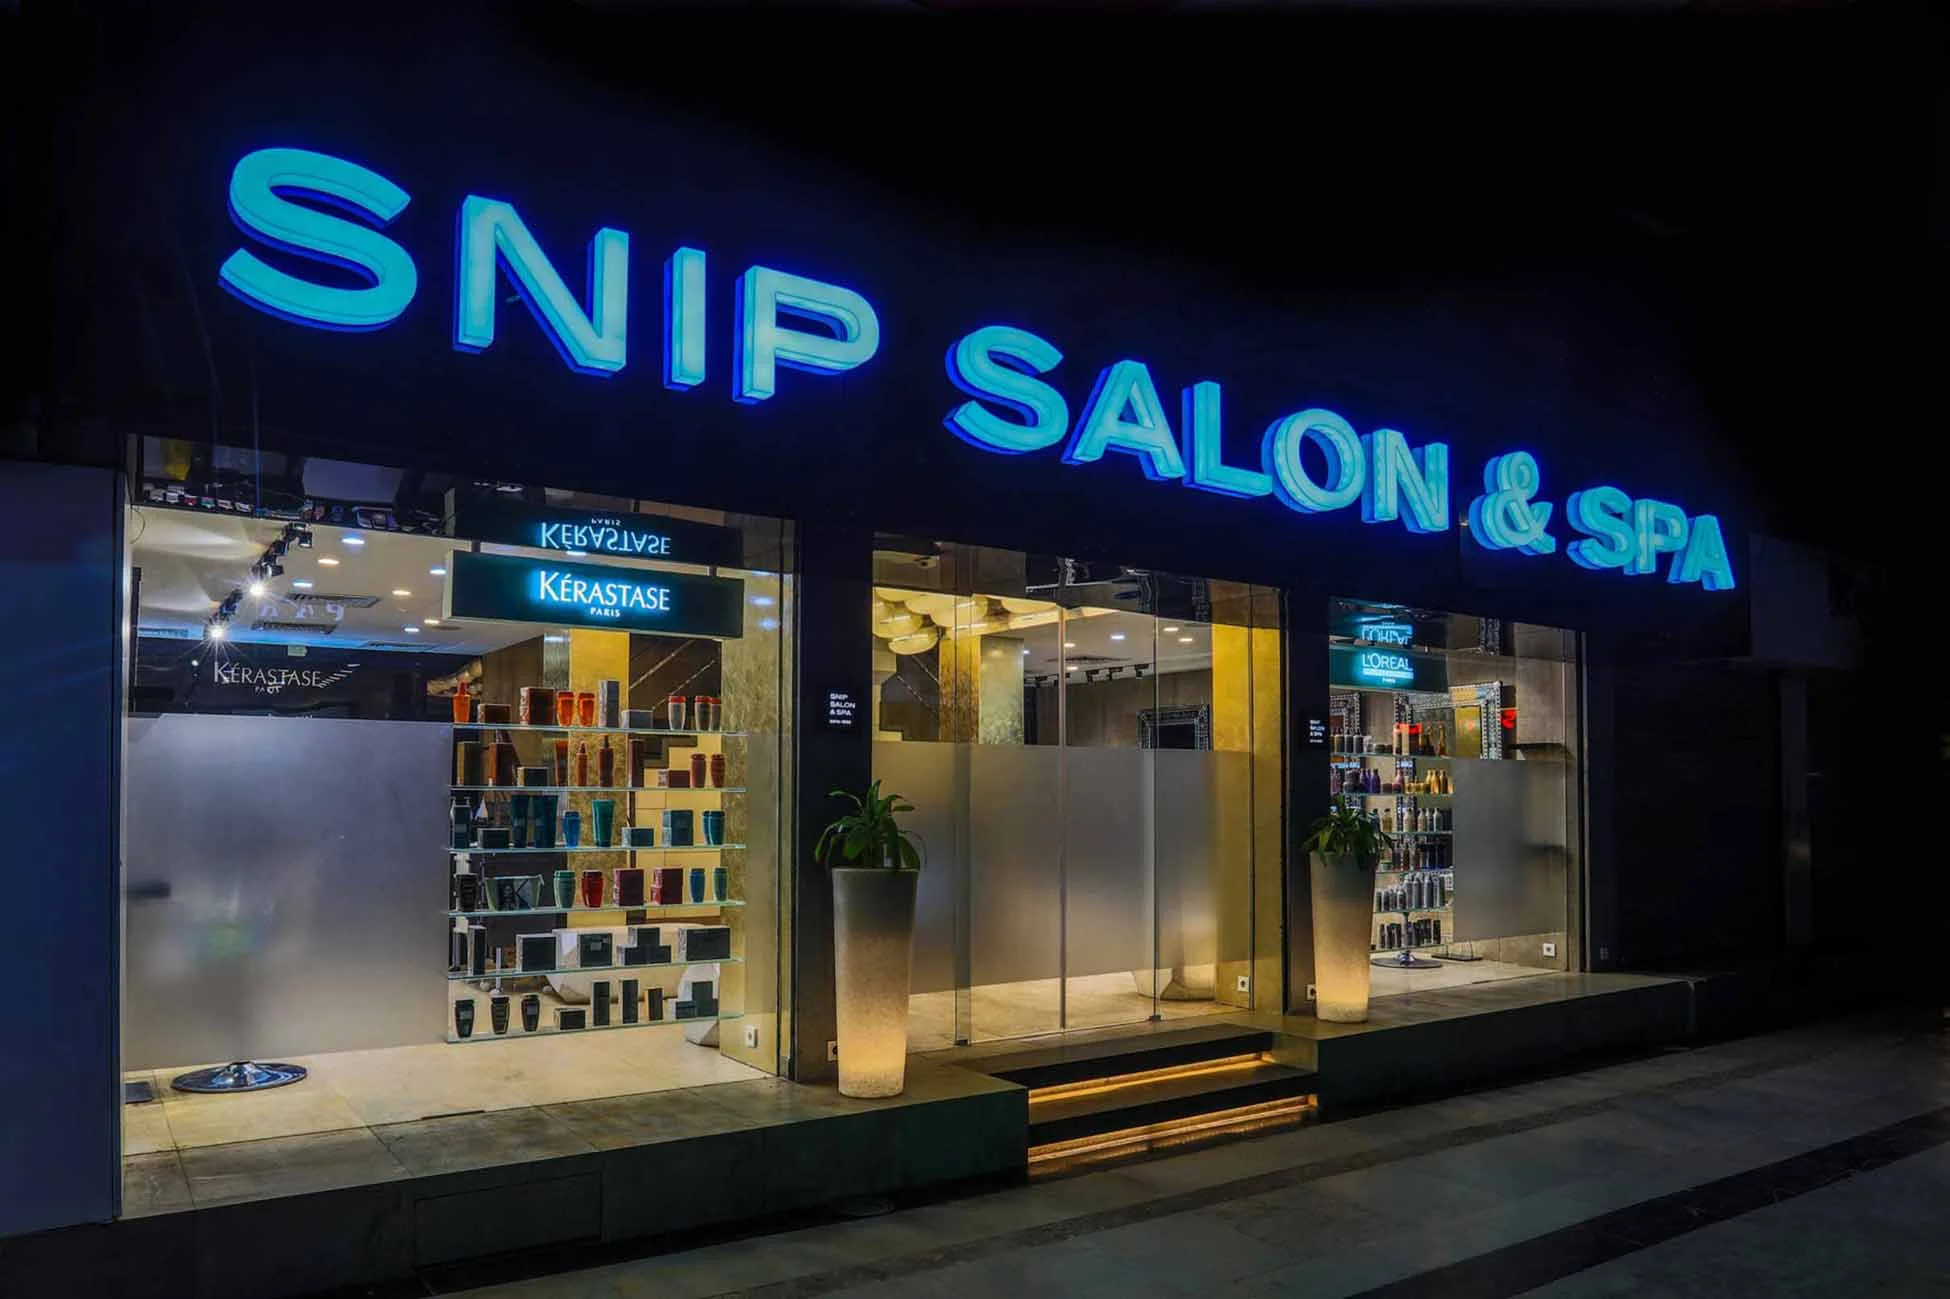 Snip salon and spa, beauty parlour in goa, best spa in goa, best salon in goa, best spa in north goa, goa beauty parlour, best spa in south goa, luxury spa in goa, best massage spa in goa, best hair salon in goa, goa beauty place, hair salon in goa, best spa in goa Calangute, best spa in Panjim Goa, good spa in goa, beauty salon in goa, best hair salon in Panjim goa, best salon in Margao, beauty parlour in Vasco, best salon in north goa, best hair salon in Margao goa, best couple spa in goa, best couple spa in north goa, best massage spa in south goa, best parlour in goa, best spa in Anjuna goa, goa salons, top 10 spa in goa, best hairdresser in goa, best luxury spa in goa, hair salon, hair cutting for women, hair salon men near me, hairdresser, goa beauty parlour, Beauty men salon, men salon parlour, Men hair cutting salon, Holiday spa treatment, Goa's best place to see, Best luxury spa, Aromatheraphy in Goa, Snip Spa, Snip Salon,